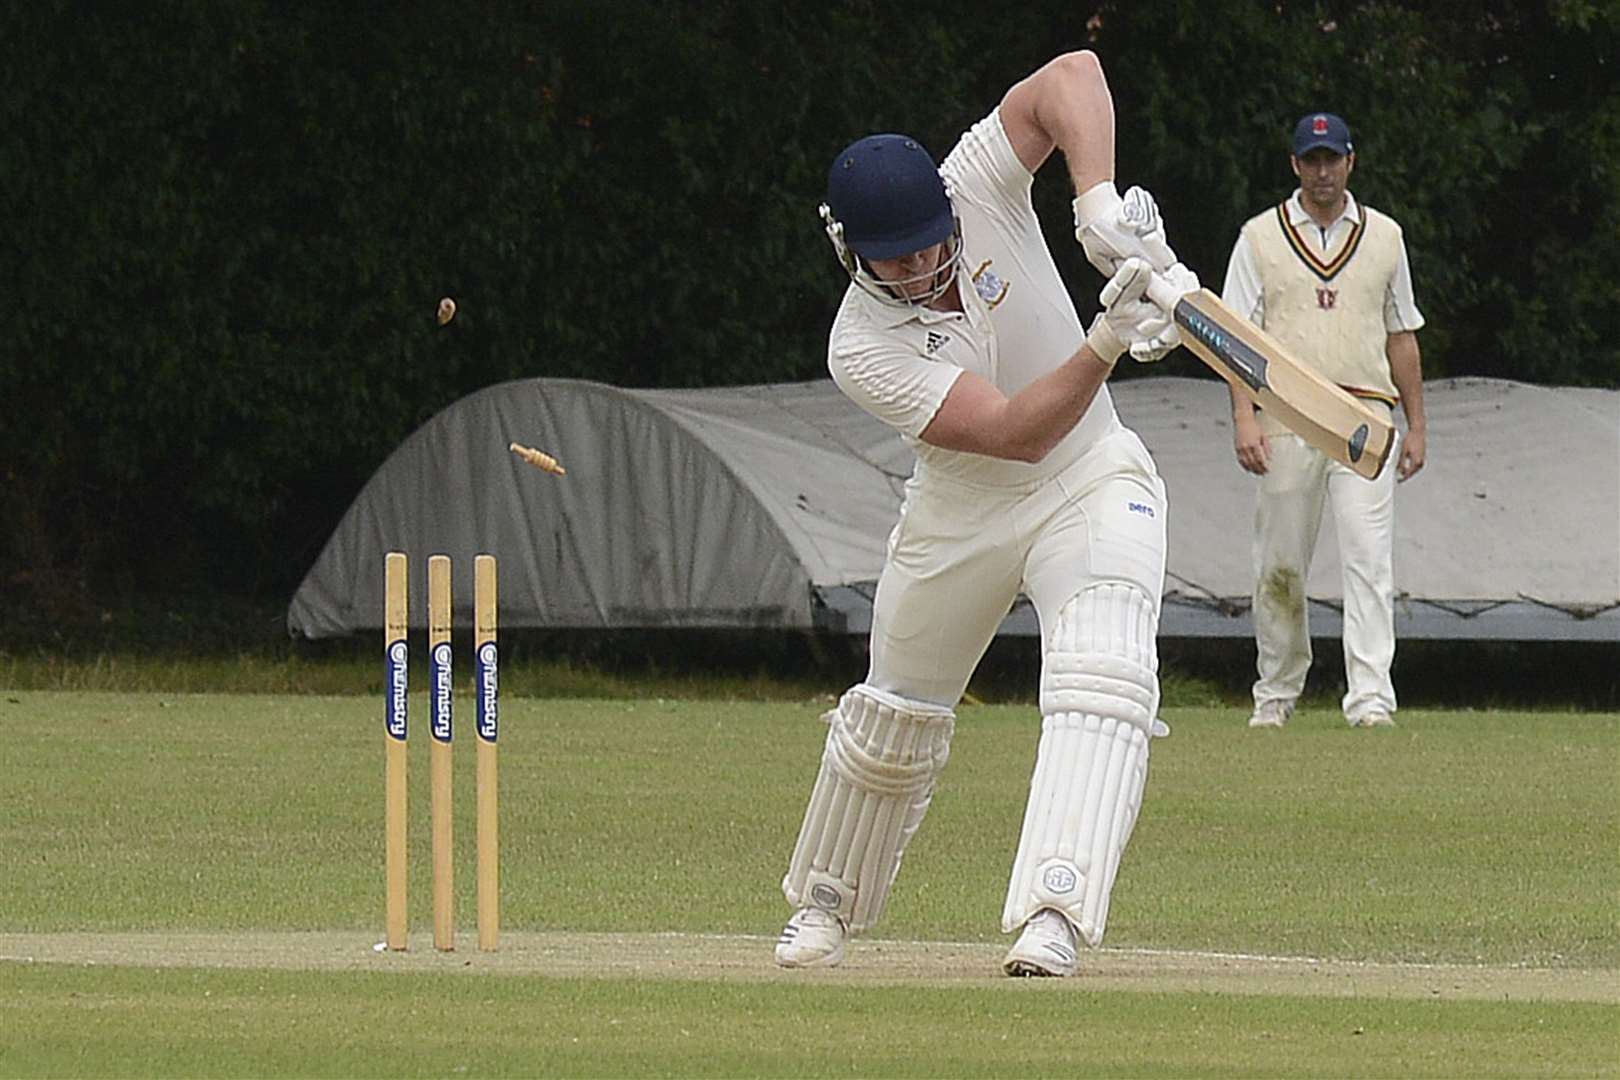 Canterbury's Justin MacVicar is bowled first ball by Beckenham's Will MacVicar. Picture: Paul Amos